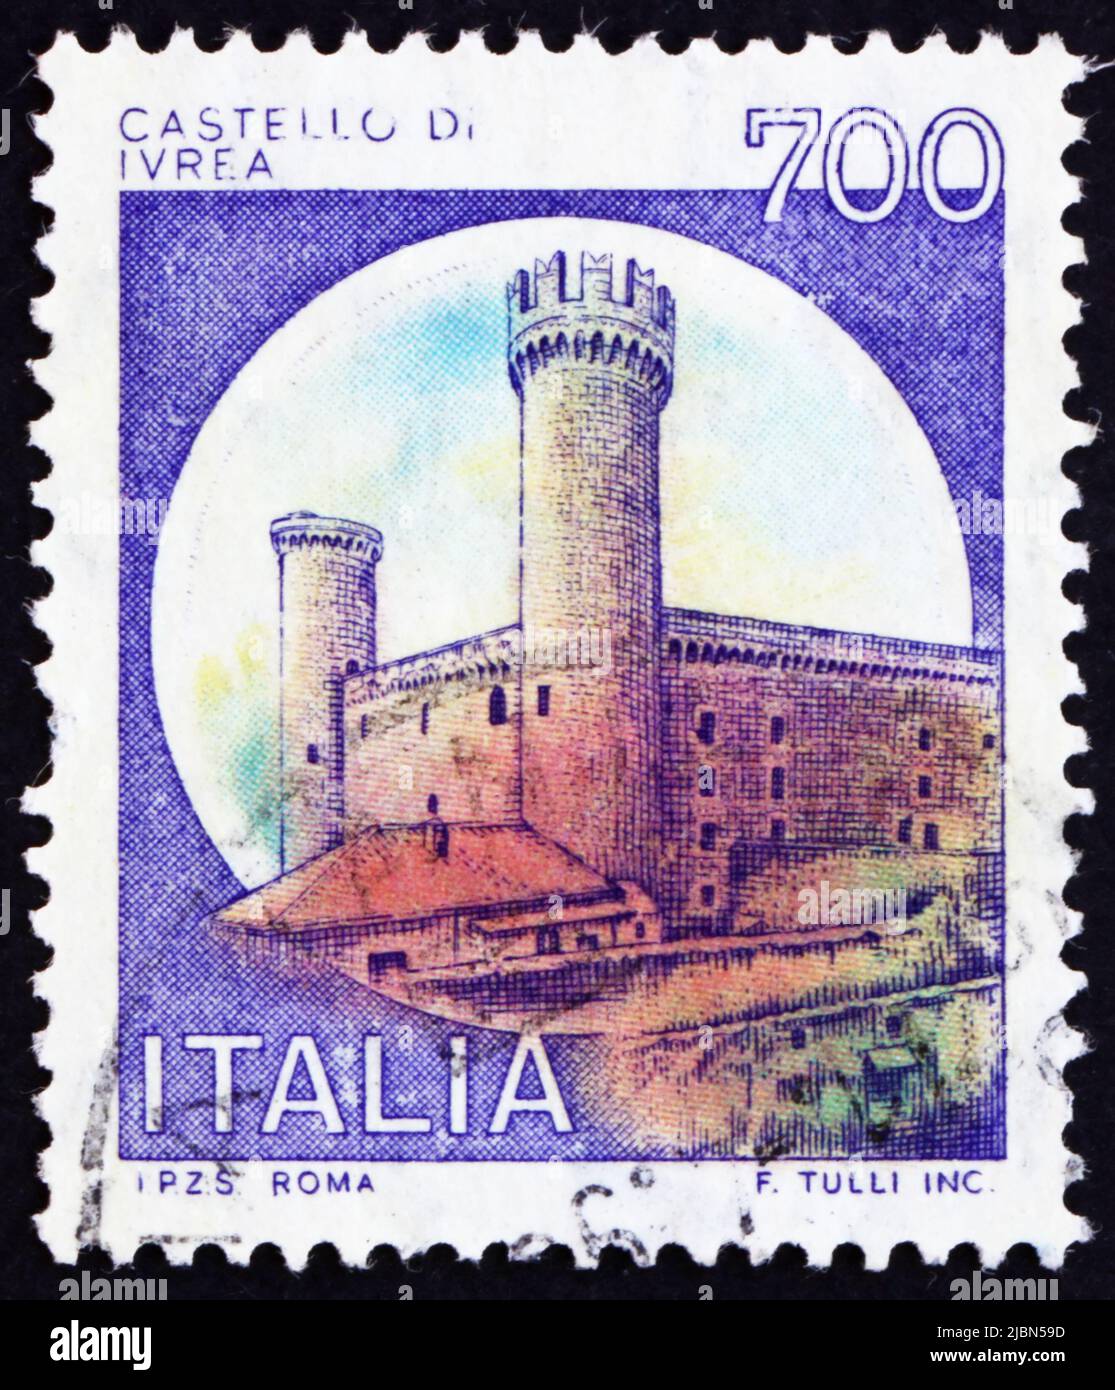 ITALY - CIRCA 1980: a stamp printed in the Italy shows Castle Ivrea, Turin, circa 1980 Stock Photo